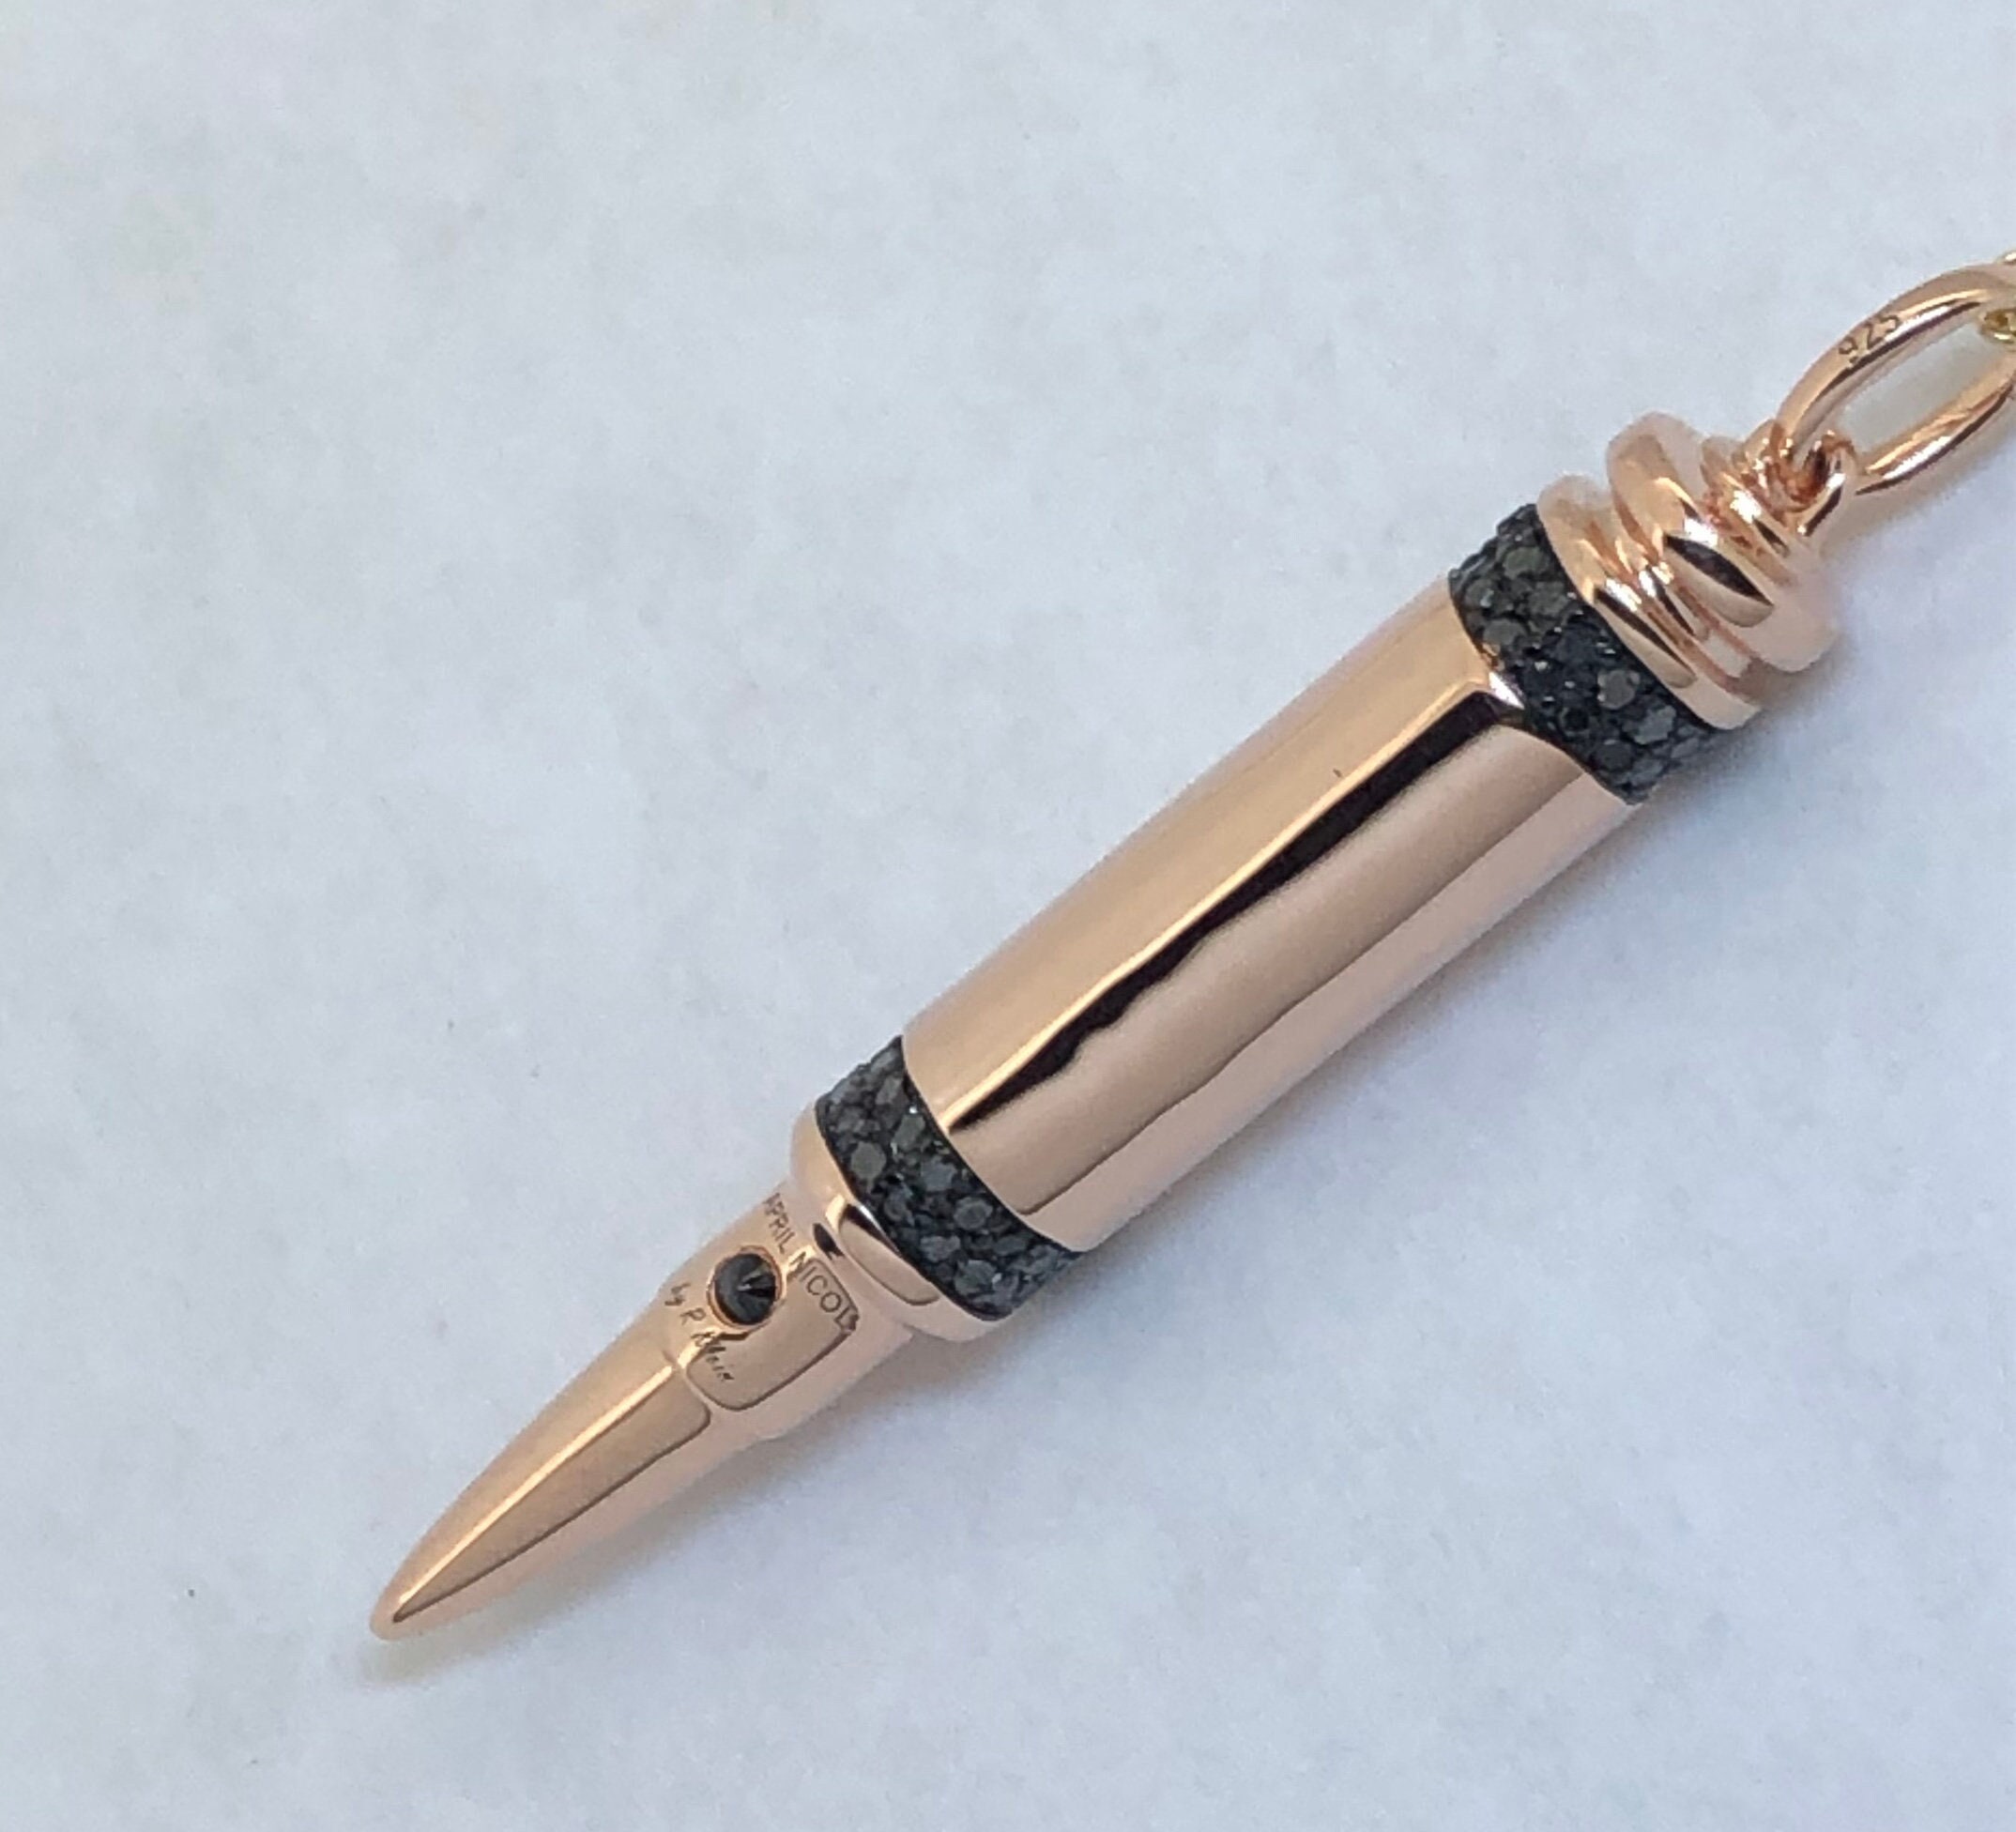 Amazon.com: Lot of 3 Stainless Steel Memorial Cremation Ash Urn Vial Tube Bullet  Pendant Keepsake Necklaces, 3 Colors Included : Clothing, Shoes & Jewelry